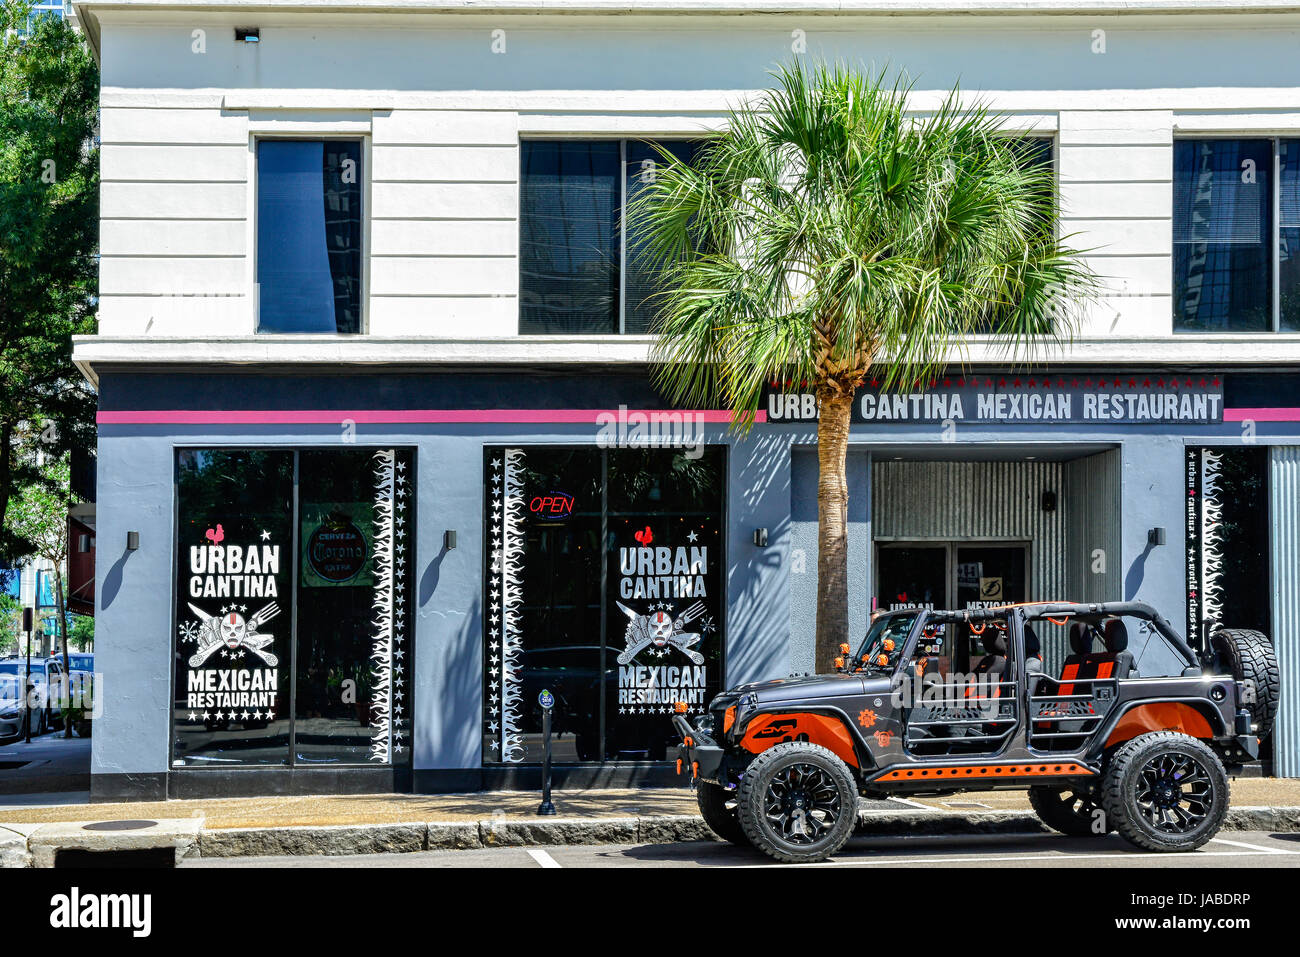 A customized off-road Jeep vehicle parked outside a trendy restaurant, the Urban Cantina, a Mexican Restaurant in downtown Tampa, FL Stock Photo